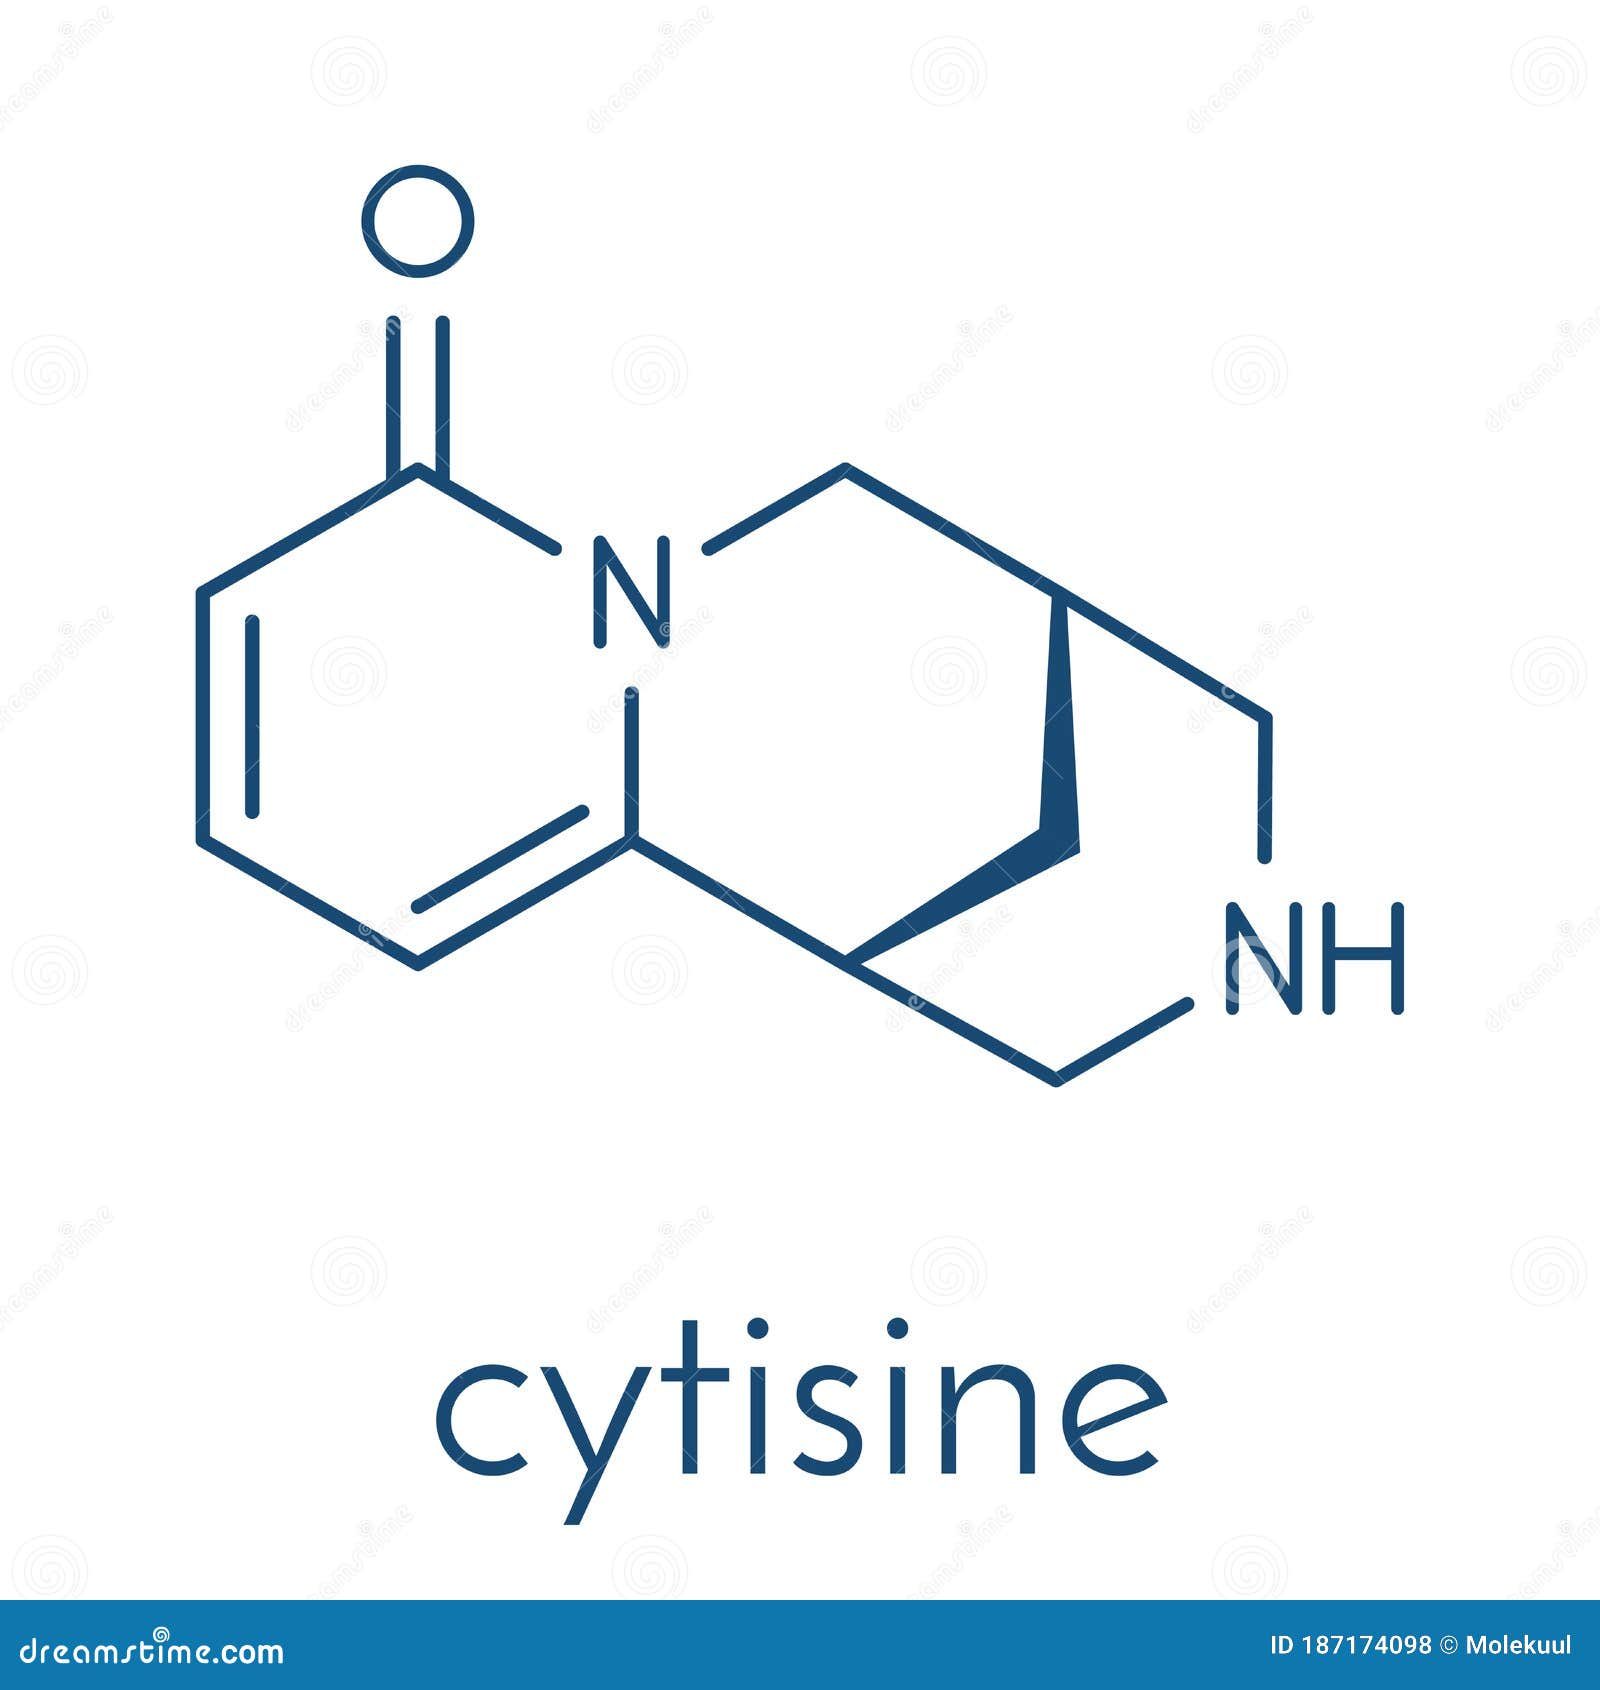 Cytisine for nicotine addiction treatment: a review of pharmacology,  therapeutics and an update of clinical trial evidence for smoking cessation  - Tutka - 2019 - Addiction - Wiley Online Library